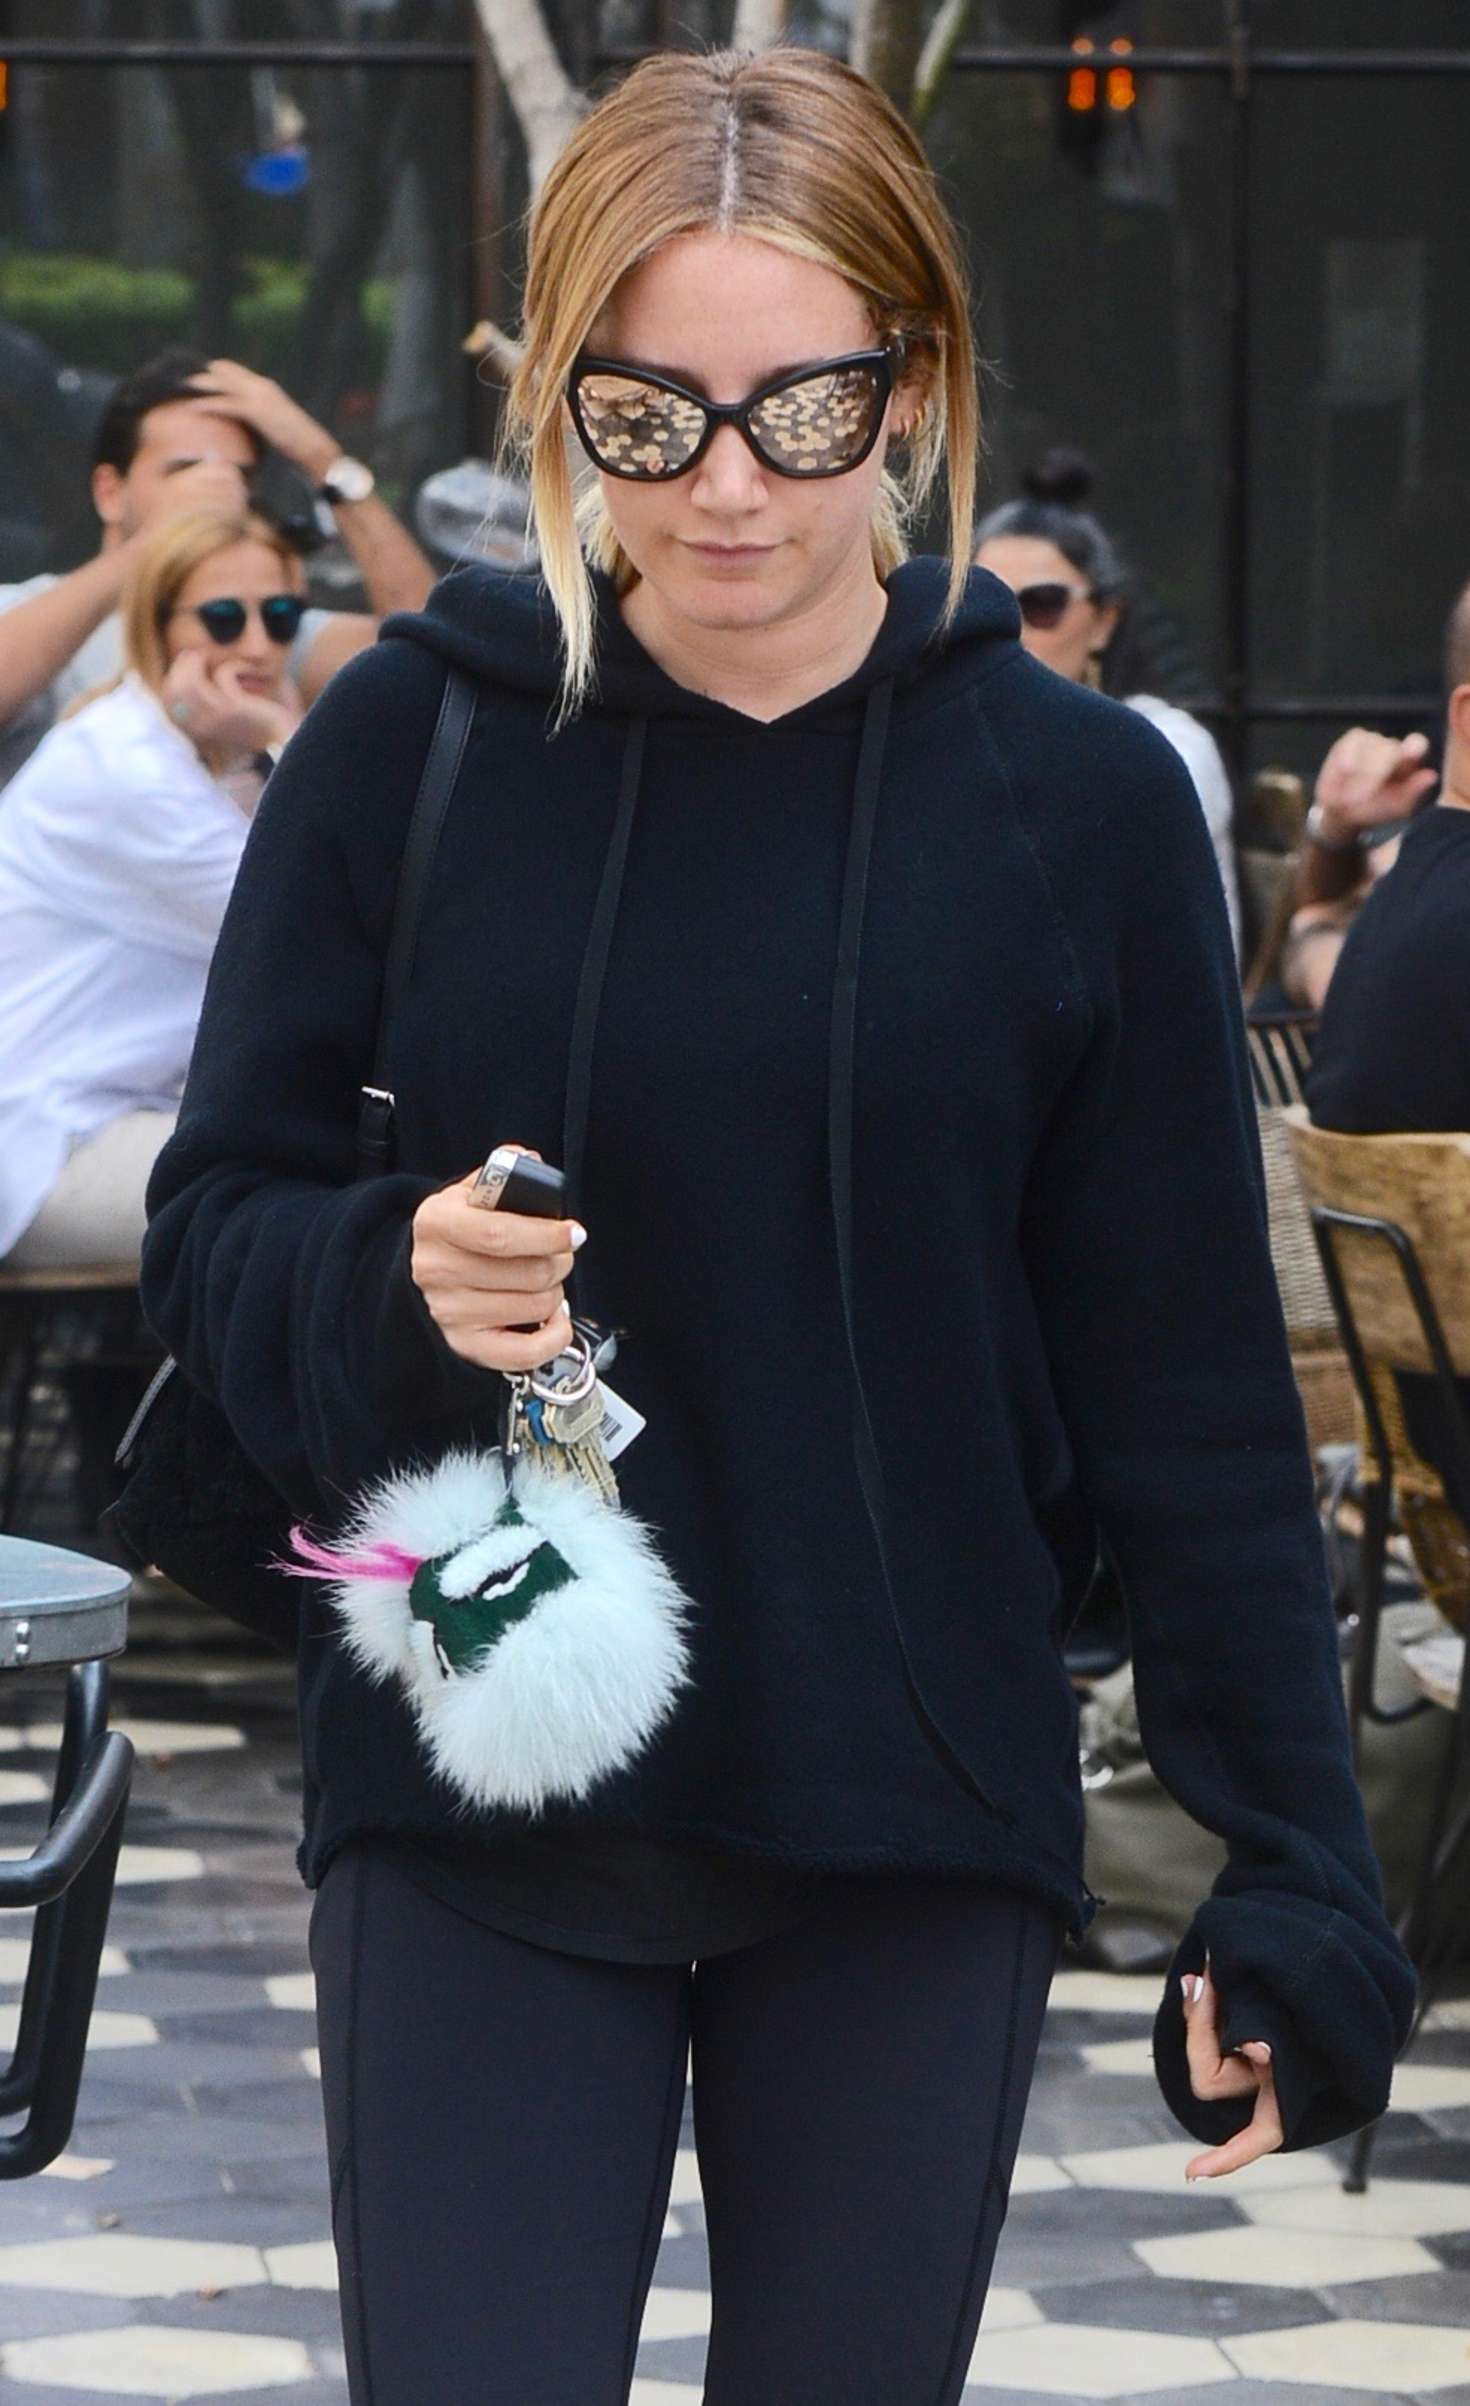 Ashley Tisdale in Spandex Leaving Lunch With Her Trainer in LA